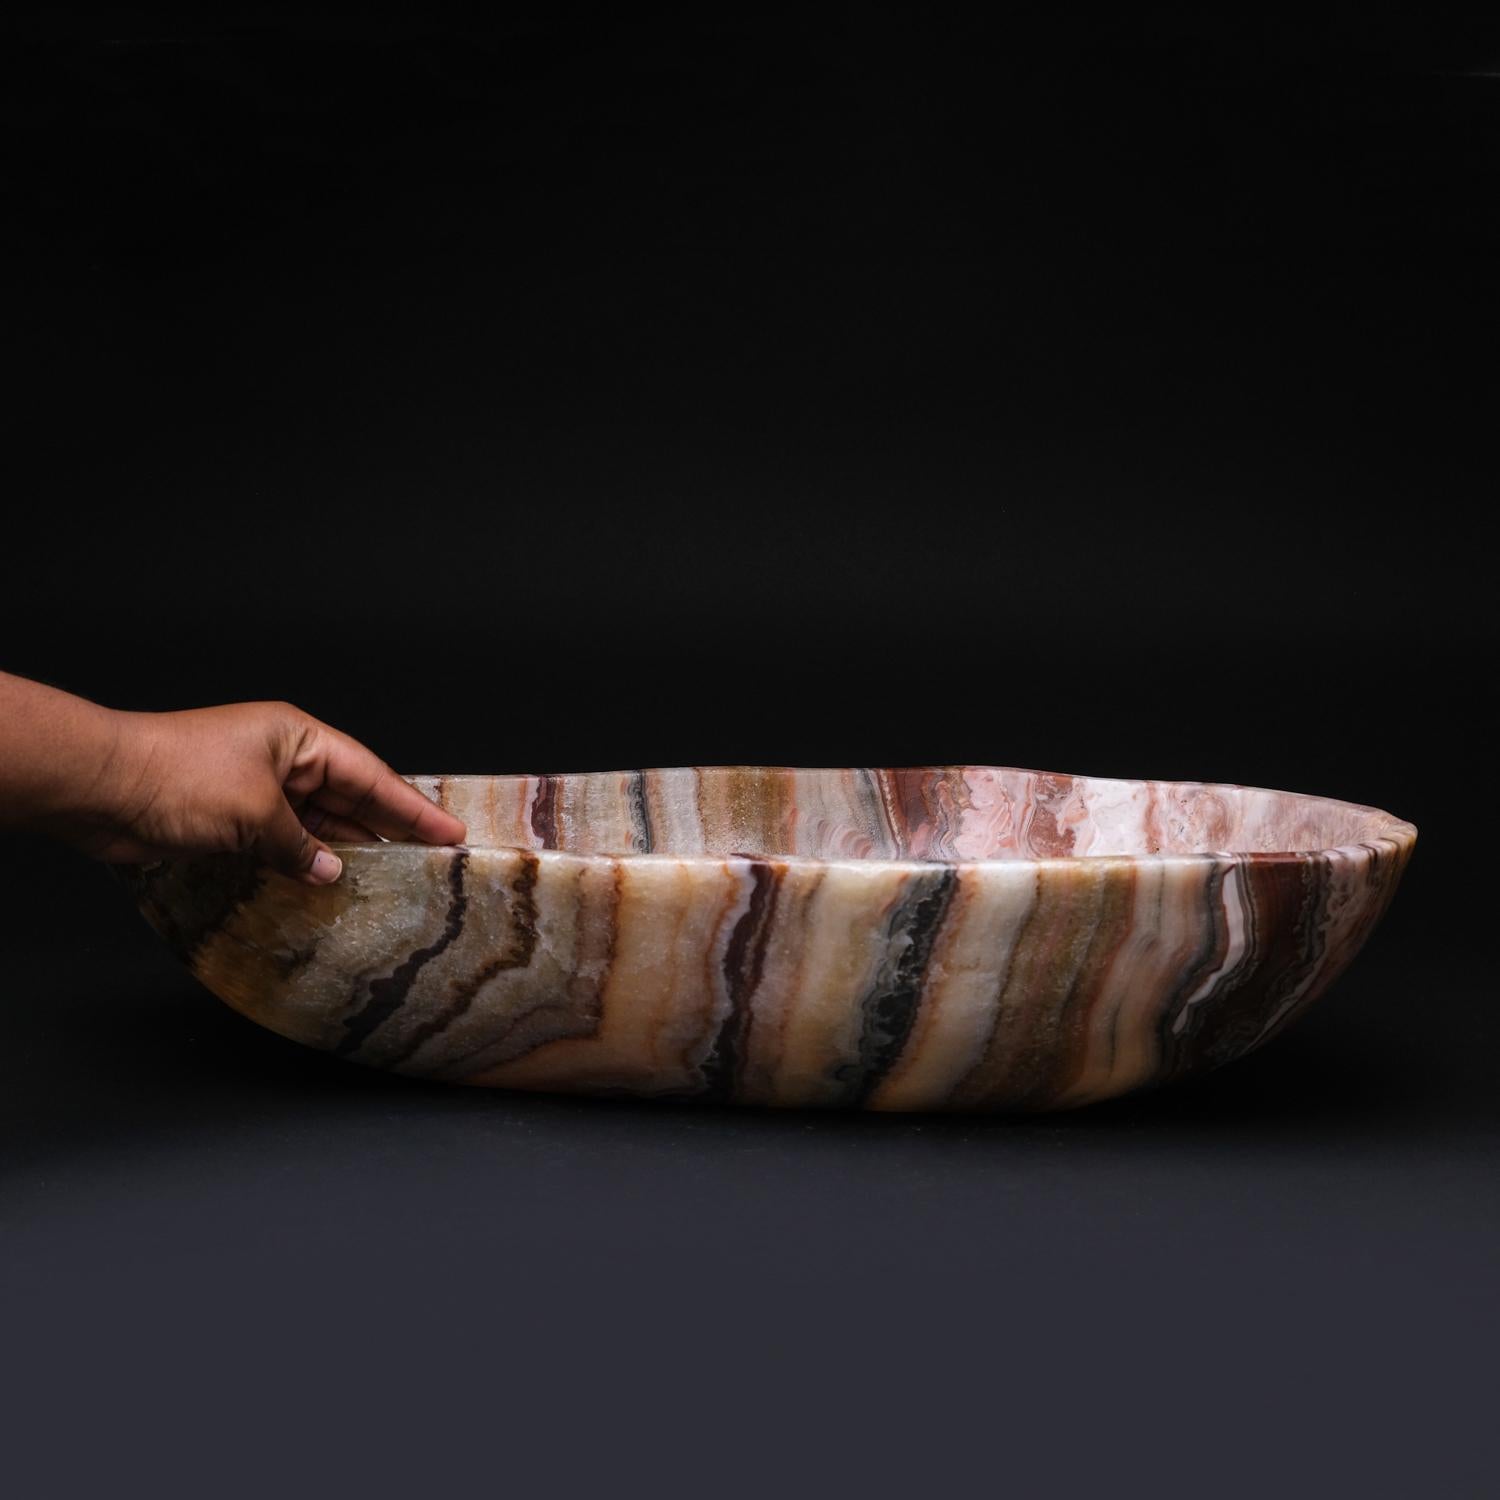 Large, one-of-a-kind, free-form natural rainbow onyx canoe bowl carved out of a single chunk of banded natural onyx. This incredible translucent piece is hand polished to a mirrored finish. This unique piece blends natural onyx shades of green,